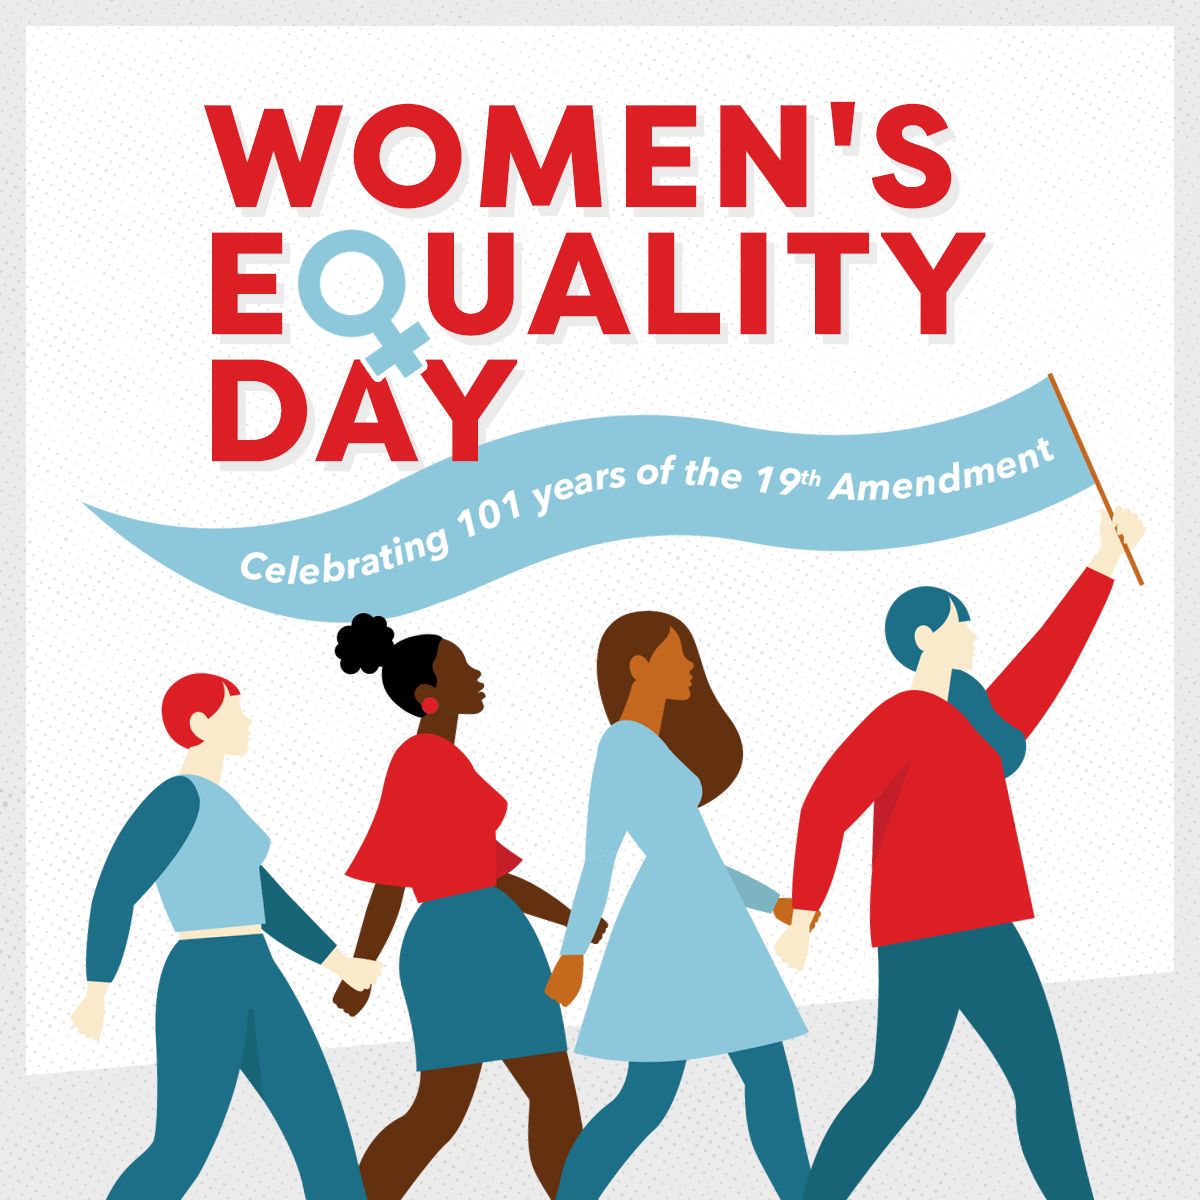 Kelly_WomanEquality_081321_1200x1200.png